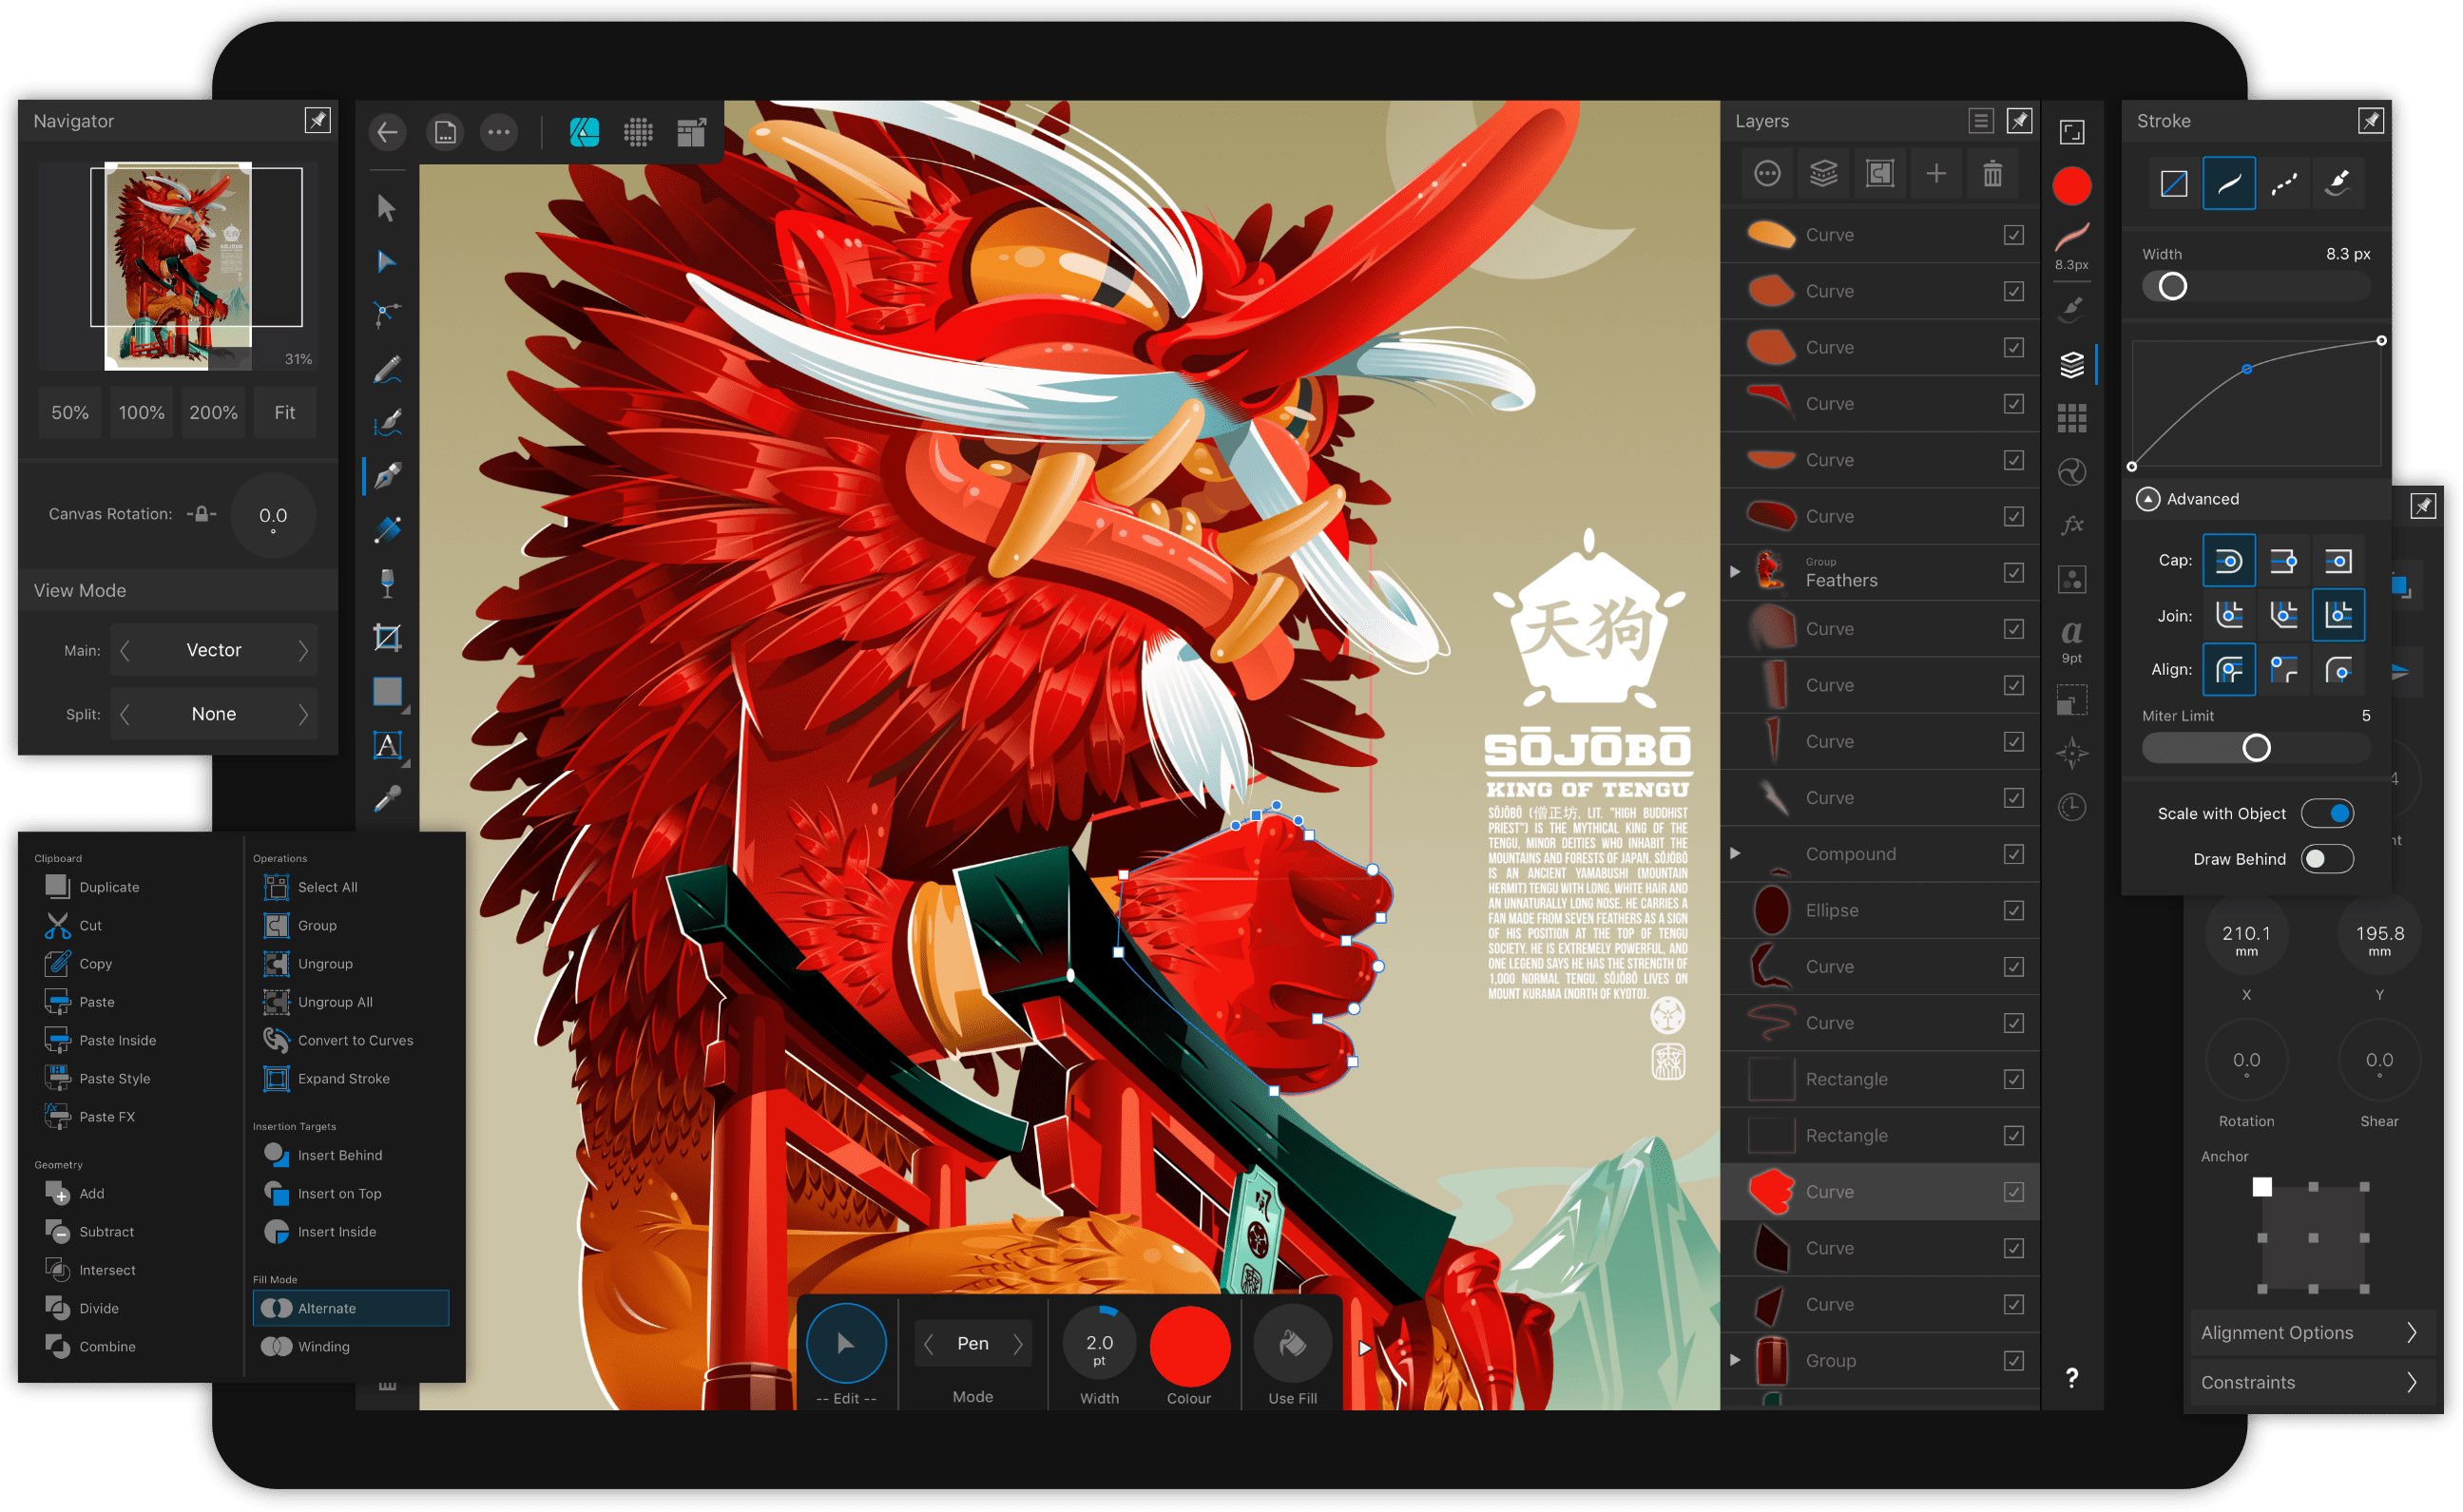 Affinity Designer for iPad: a screenshot showing brush selections and raster tools